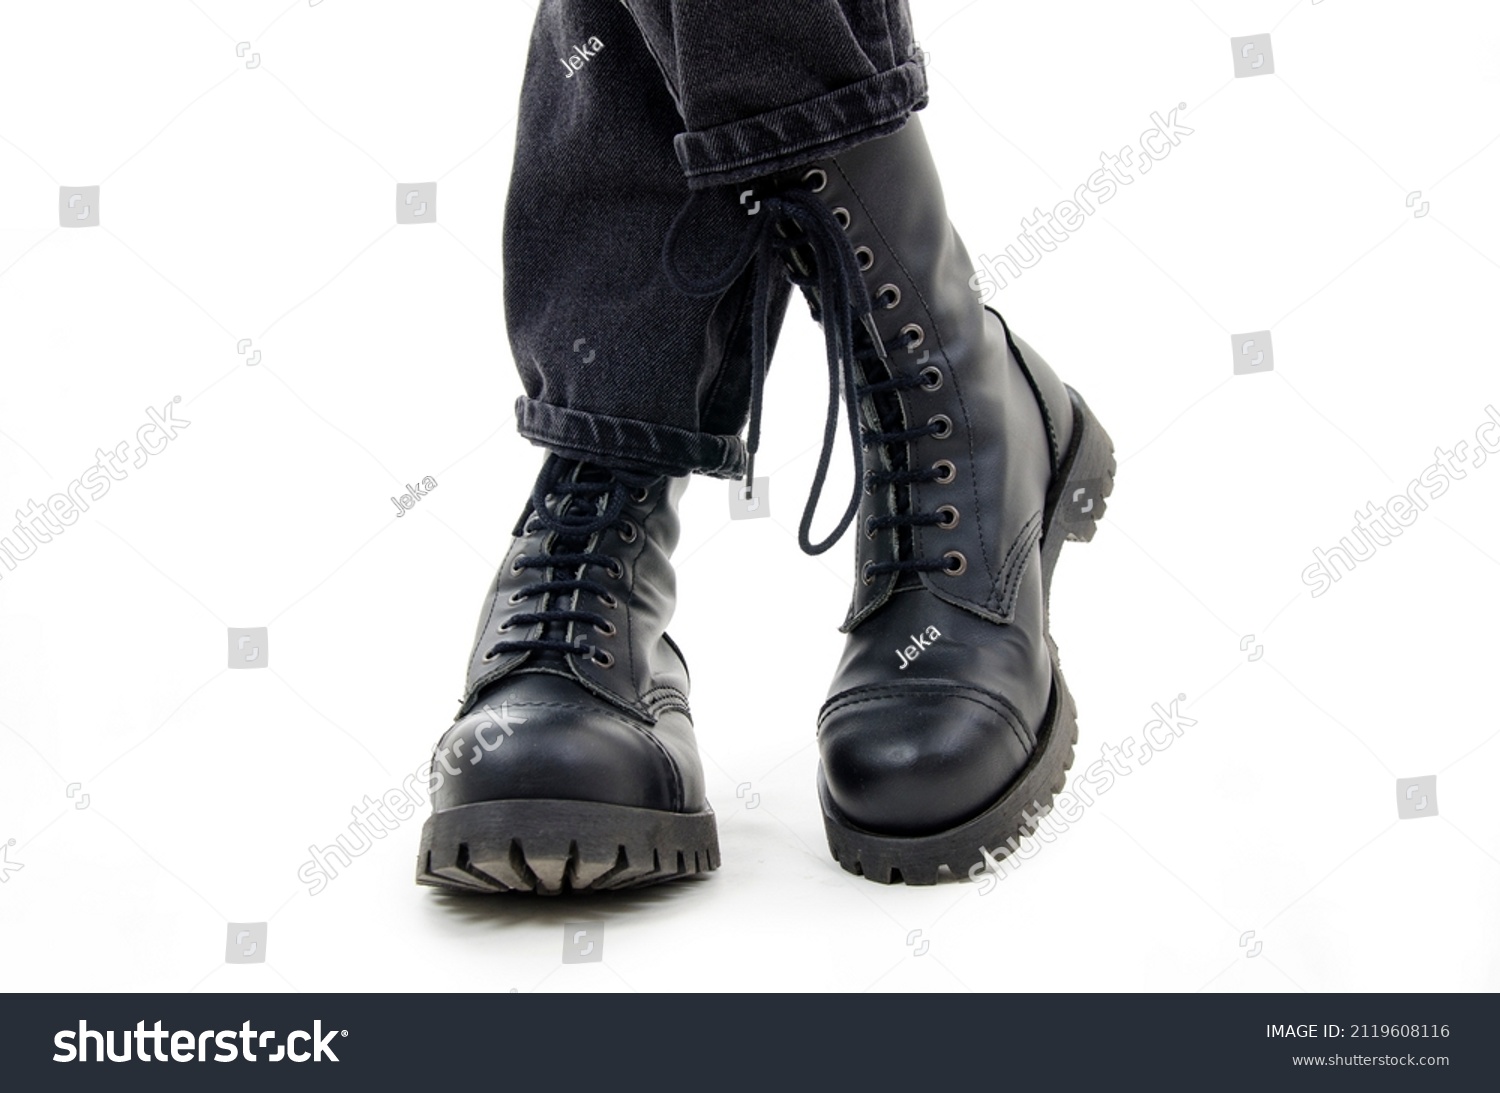 A woman standing in combat boots. Isolated on white background #2119608116